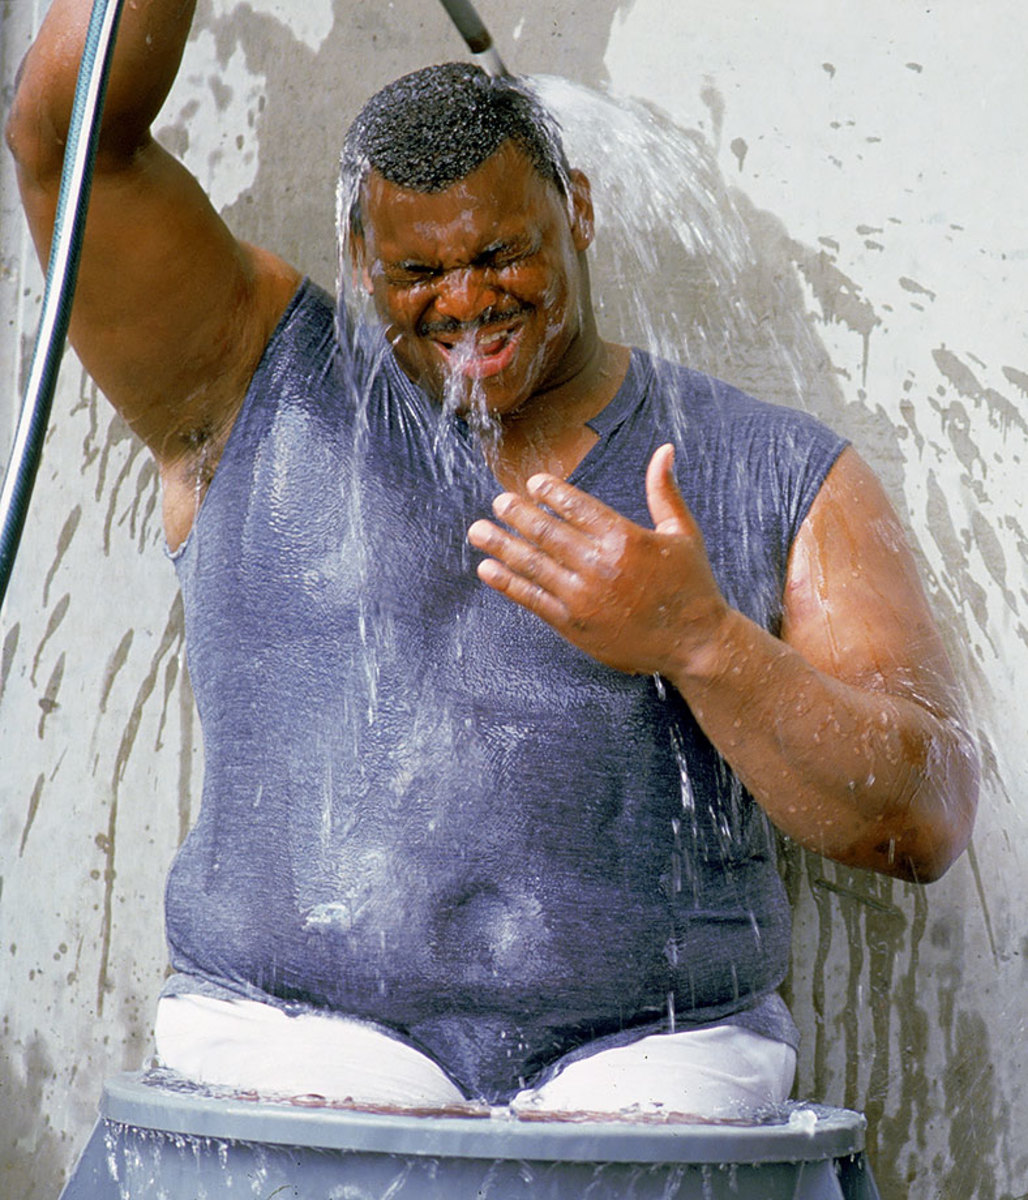 William 'The Refrigerator' Perry Has Endured a Challenging Life